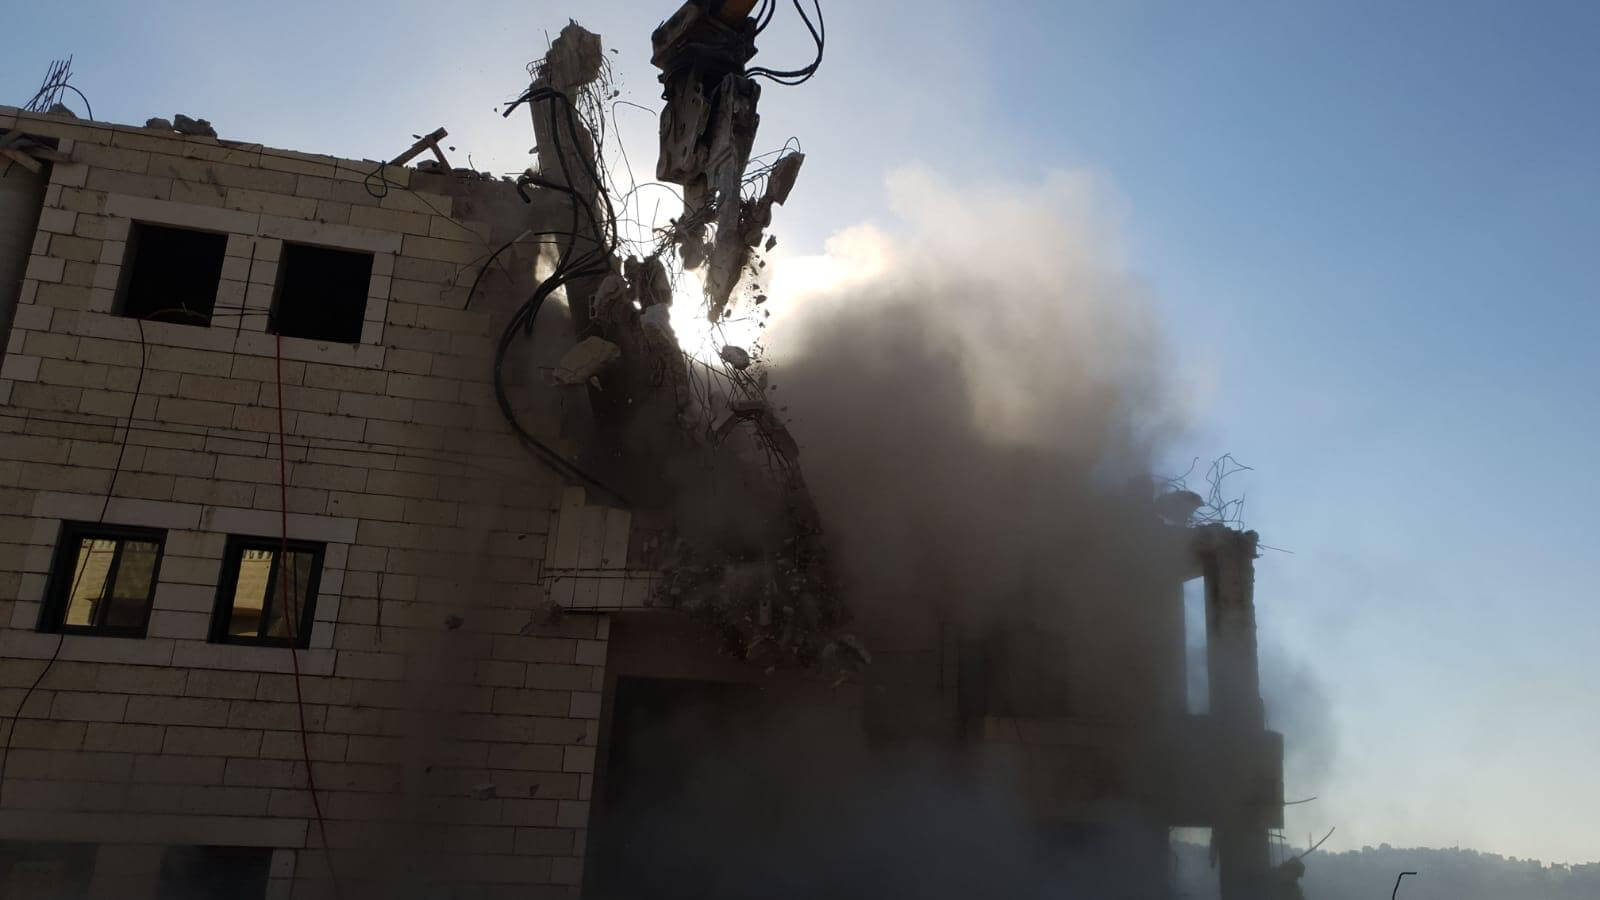 Israeli forces demolished 10 buildings in Sur Bahir on Monday, July 22, 2019 (Photo: All That's Left: Anti-Occupation Collective)